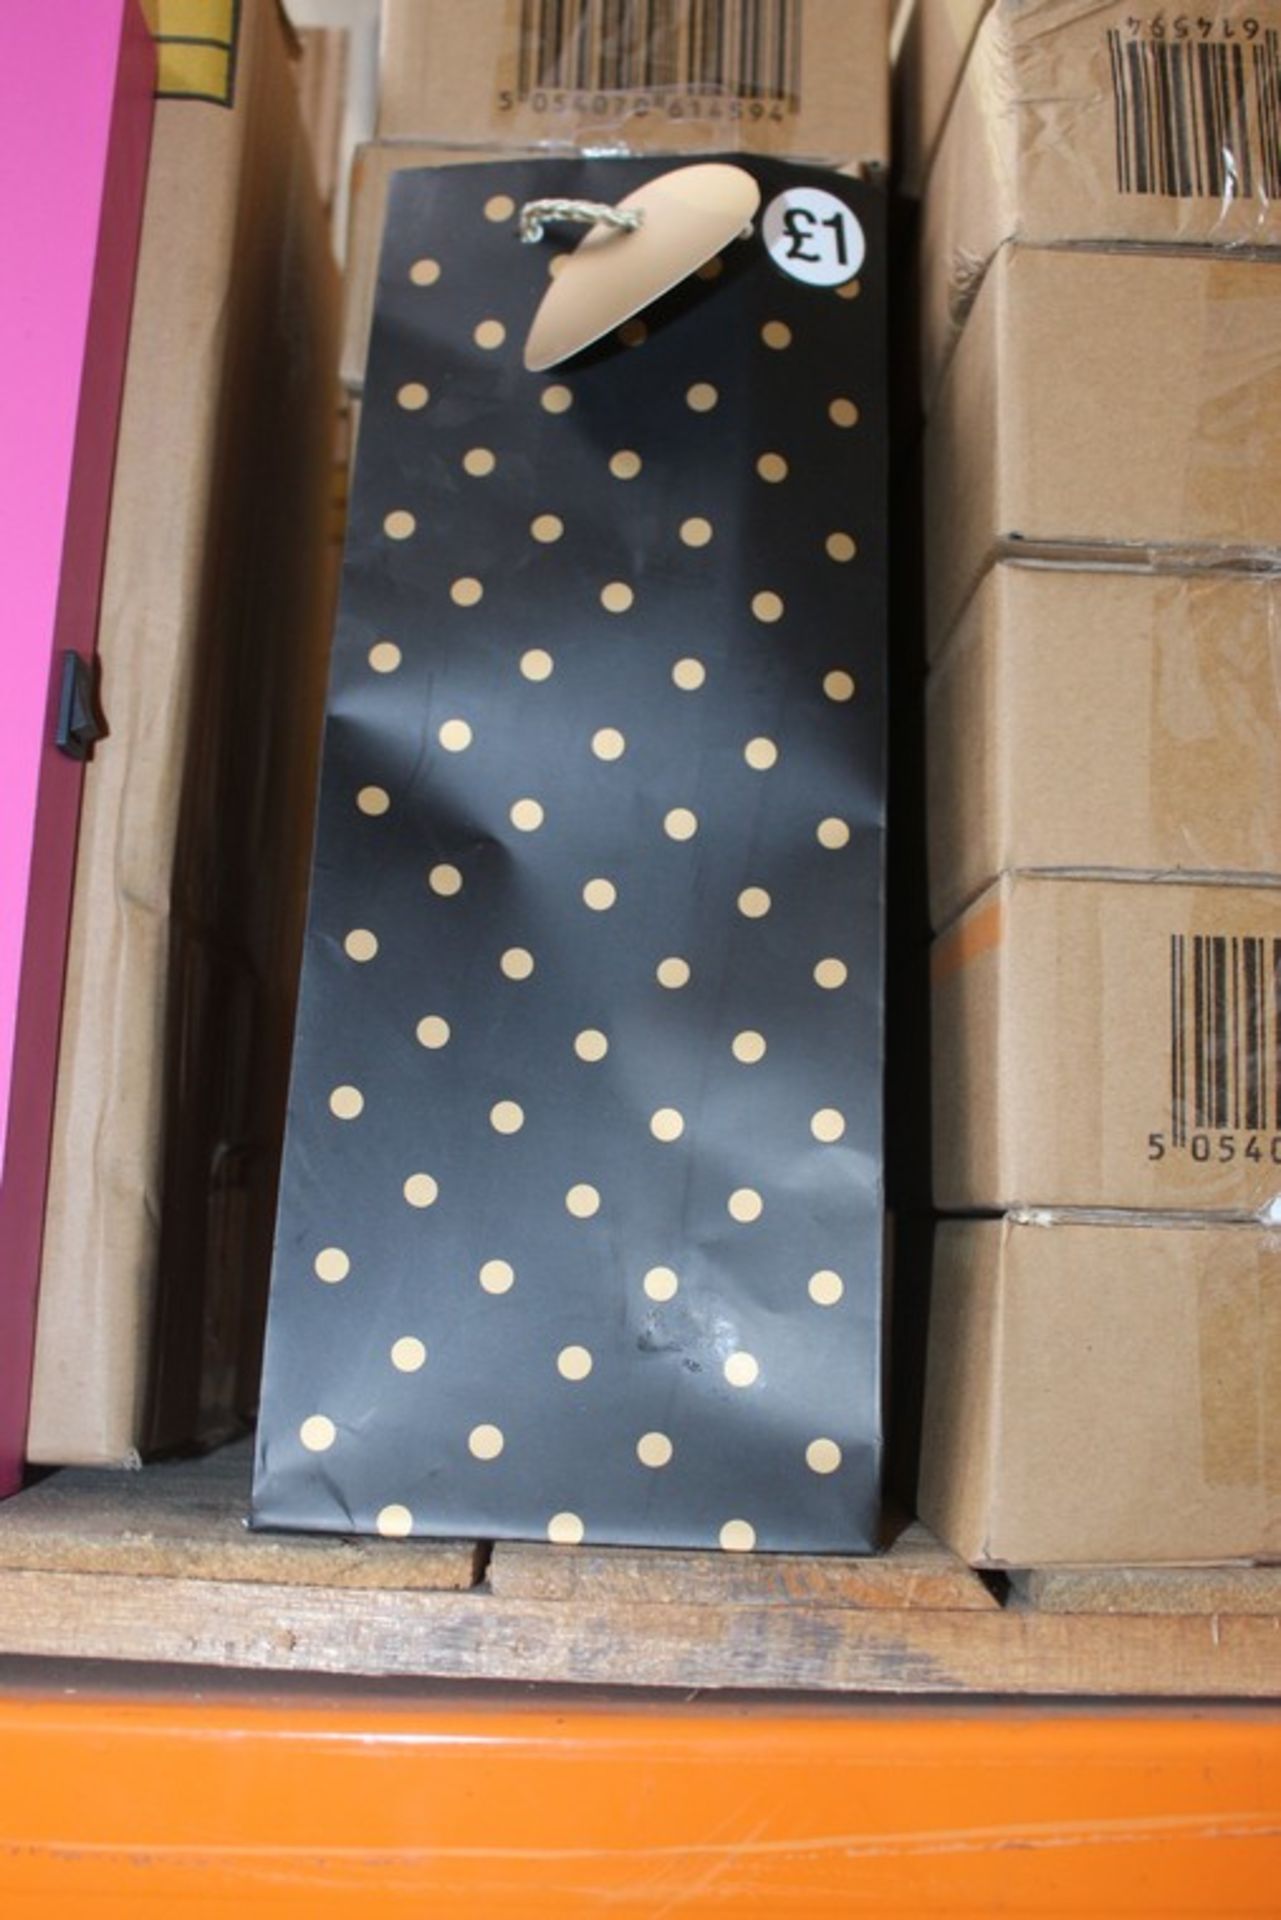 2 x BOXES EACH CONTAINING 12 BLACK BOTTLE BAGS WITH GOLD POKKA DOTS *PLEASE NOTE THAT THE BID